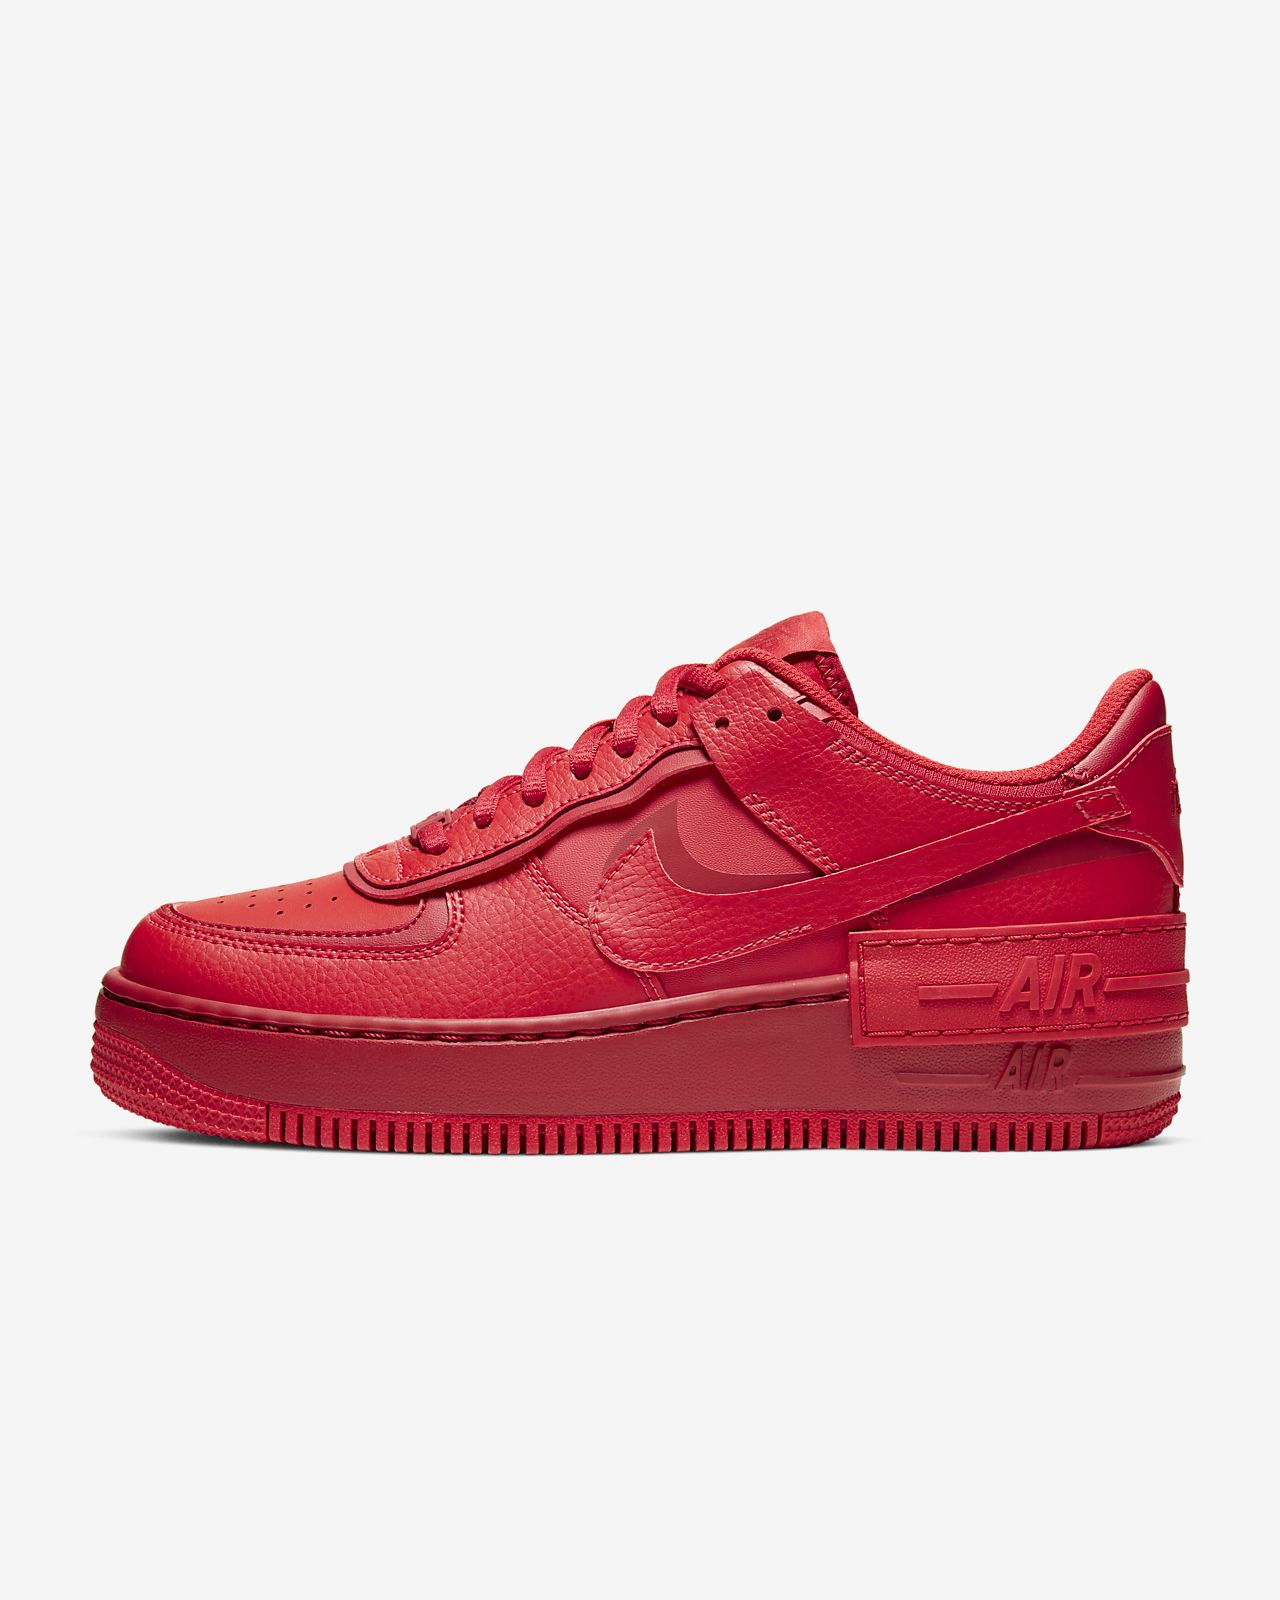 solid red nike